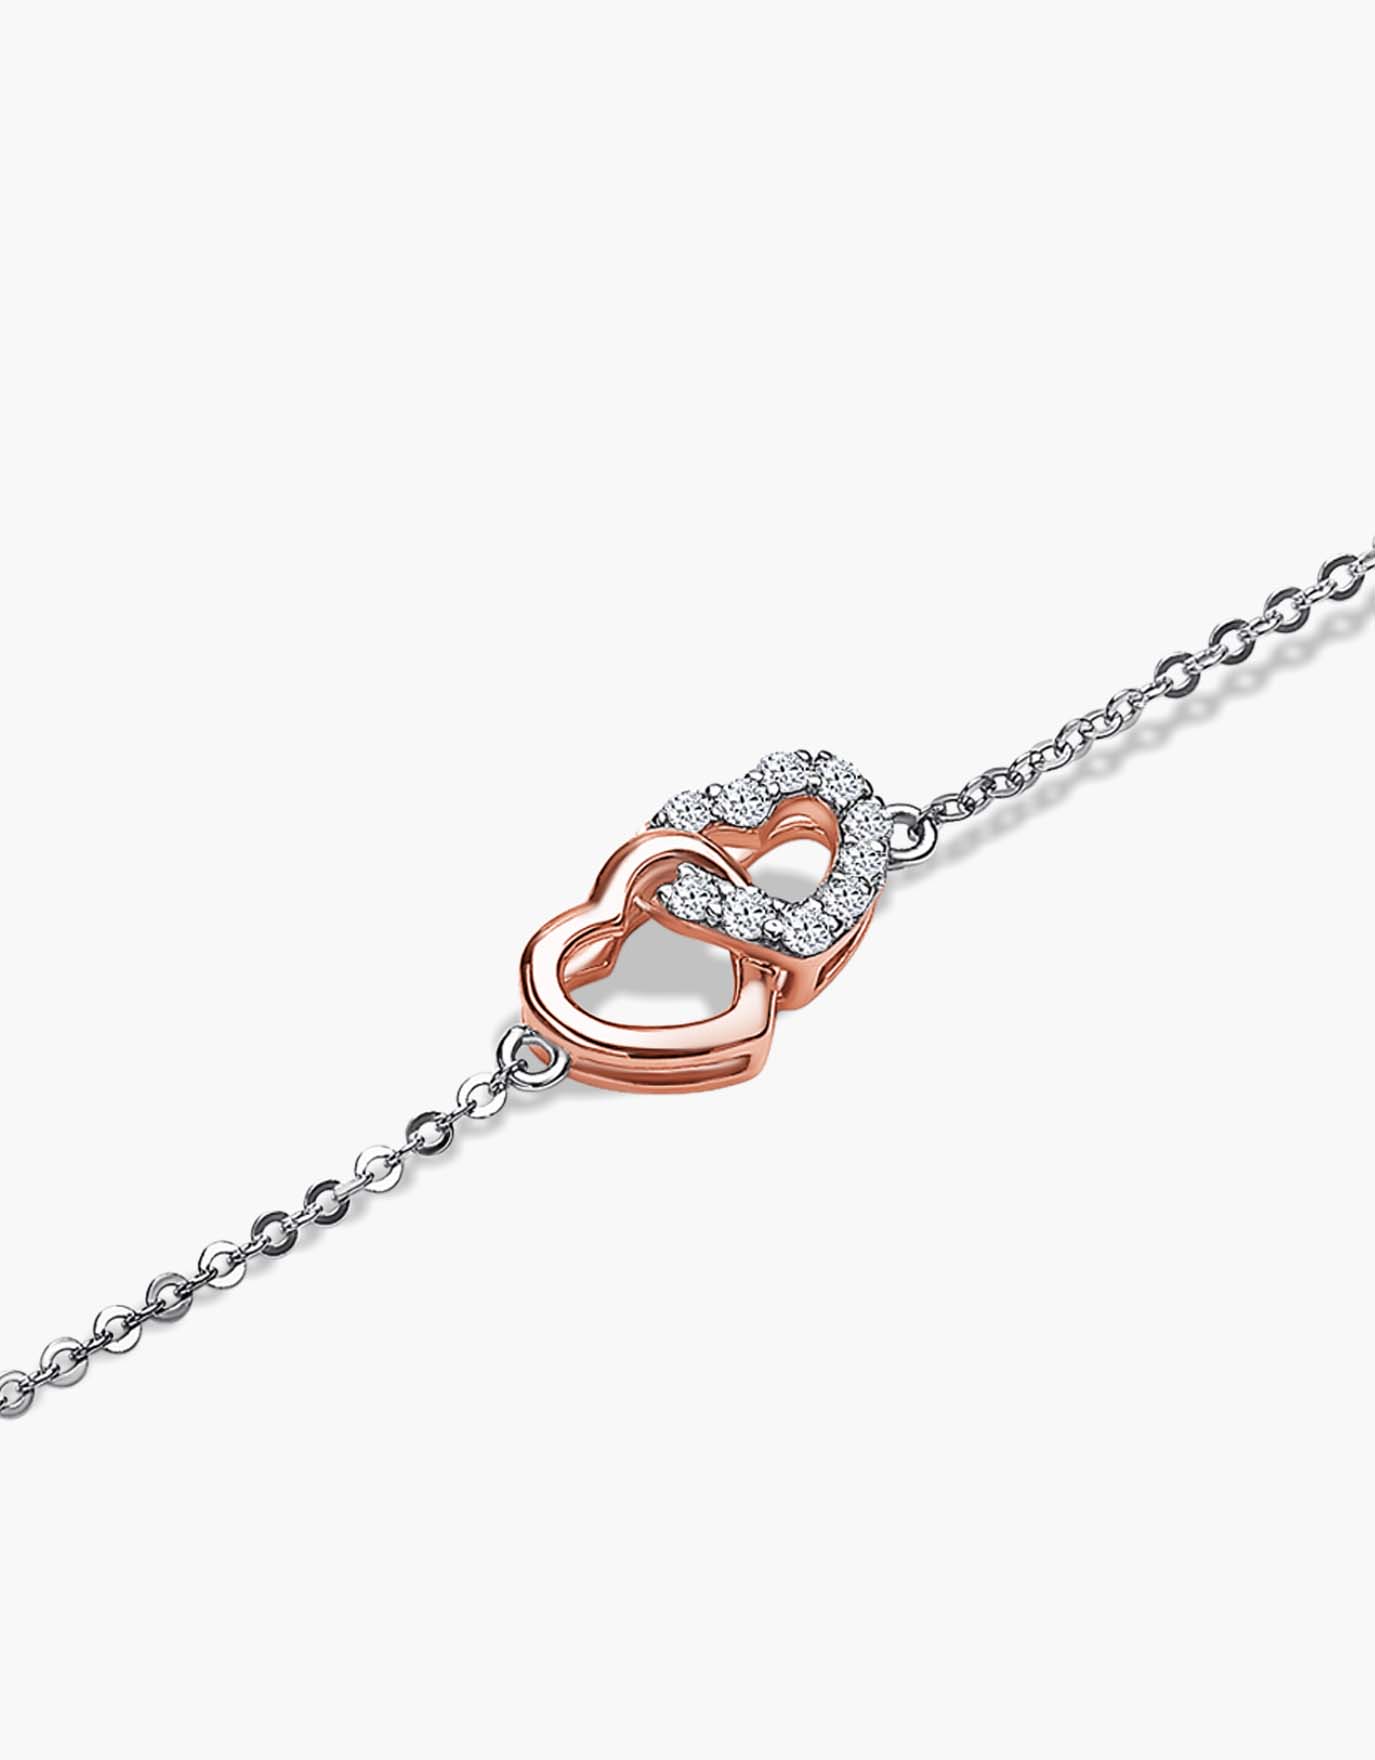 LVC Charmes Entwined Hearts Diamond Bracelet in White and Rose Gold